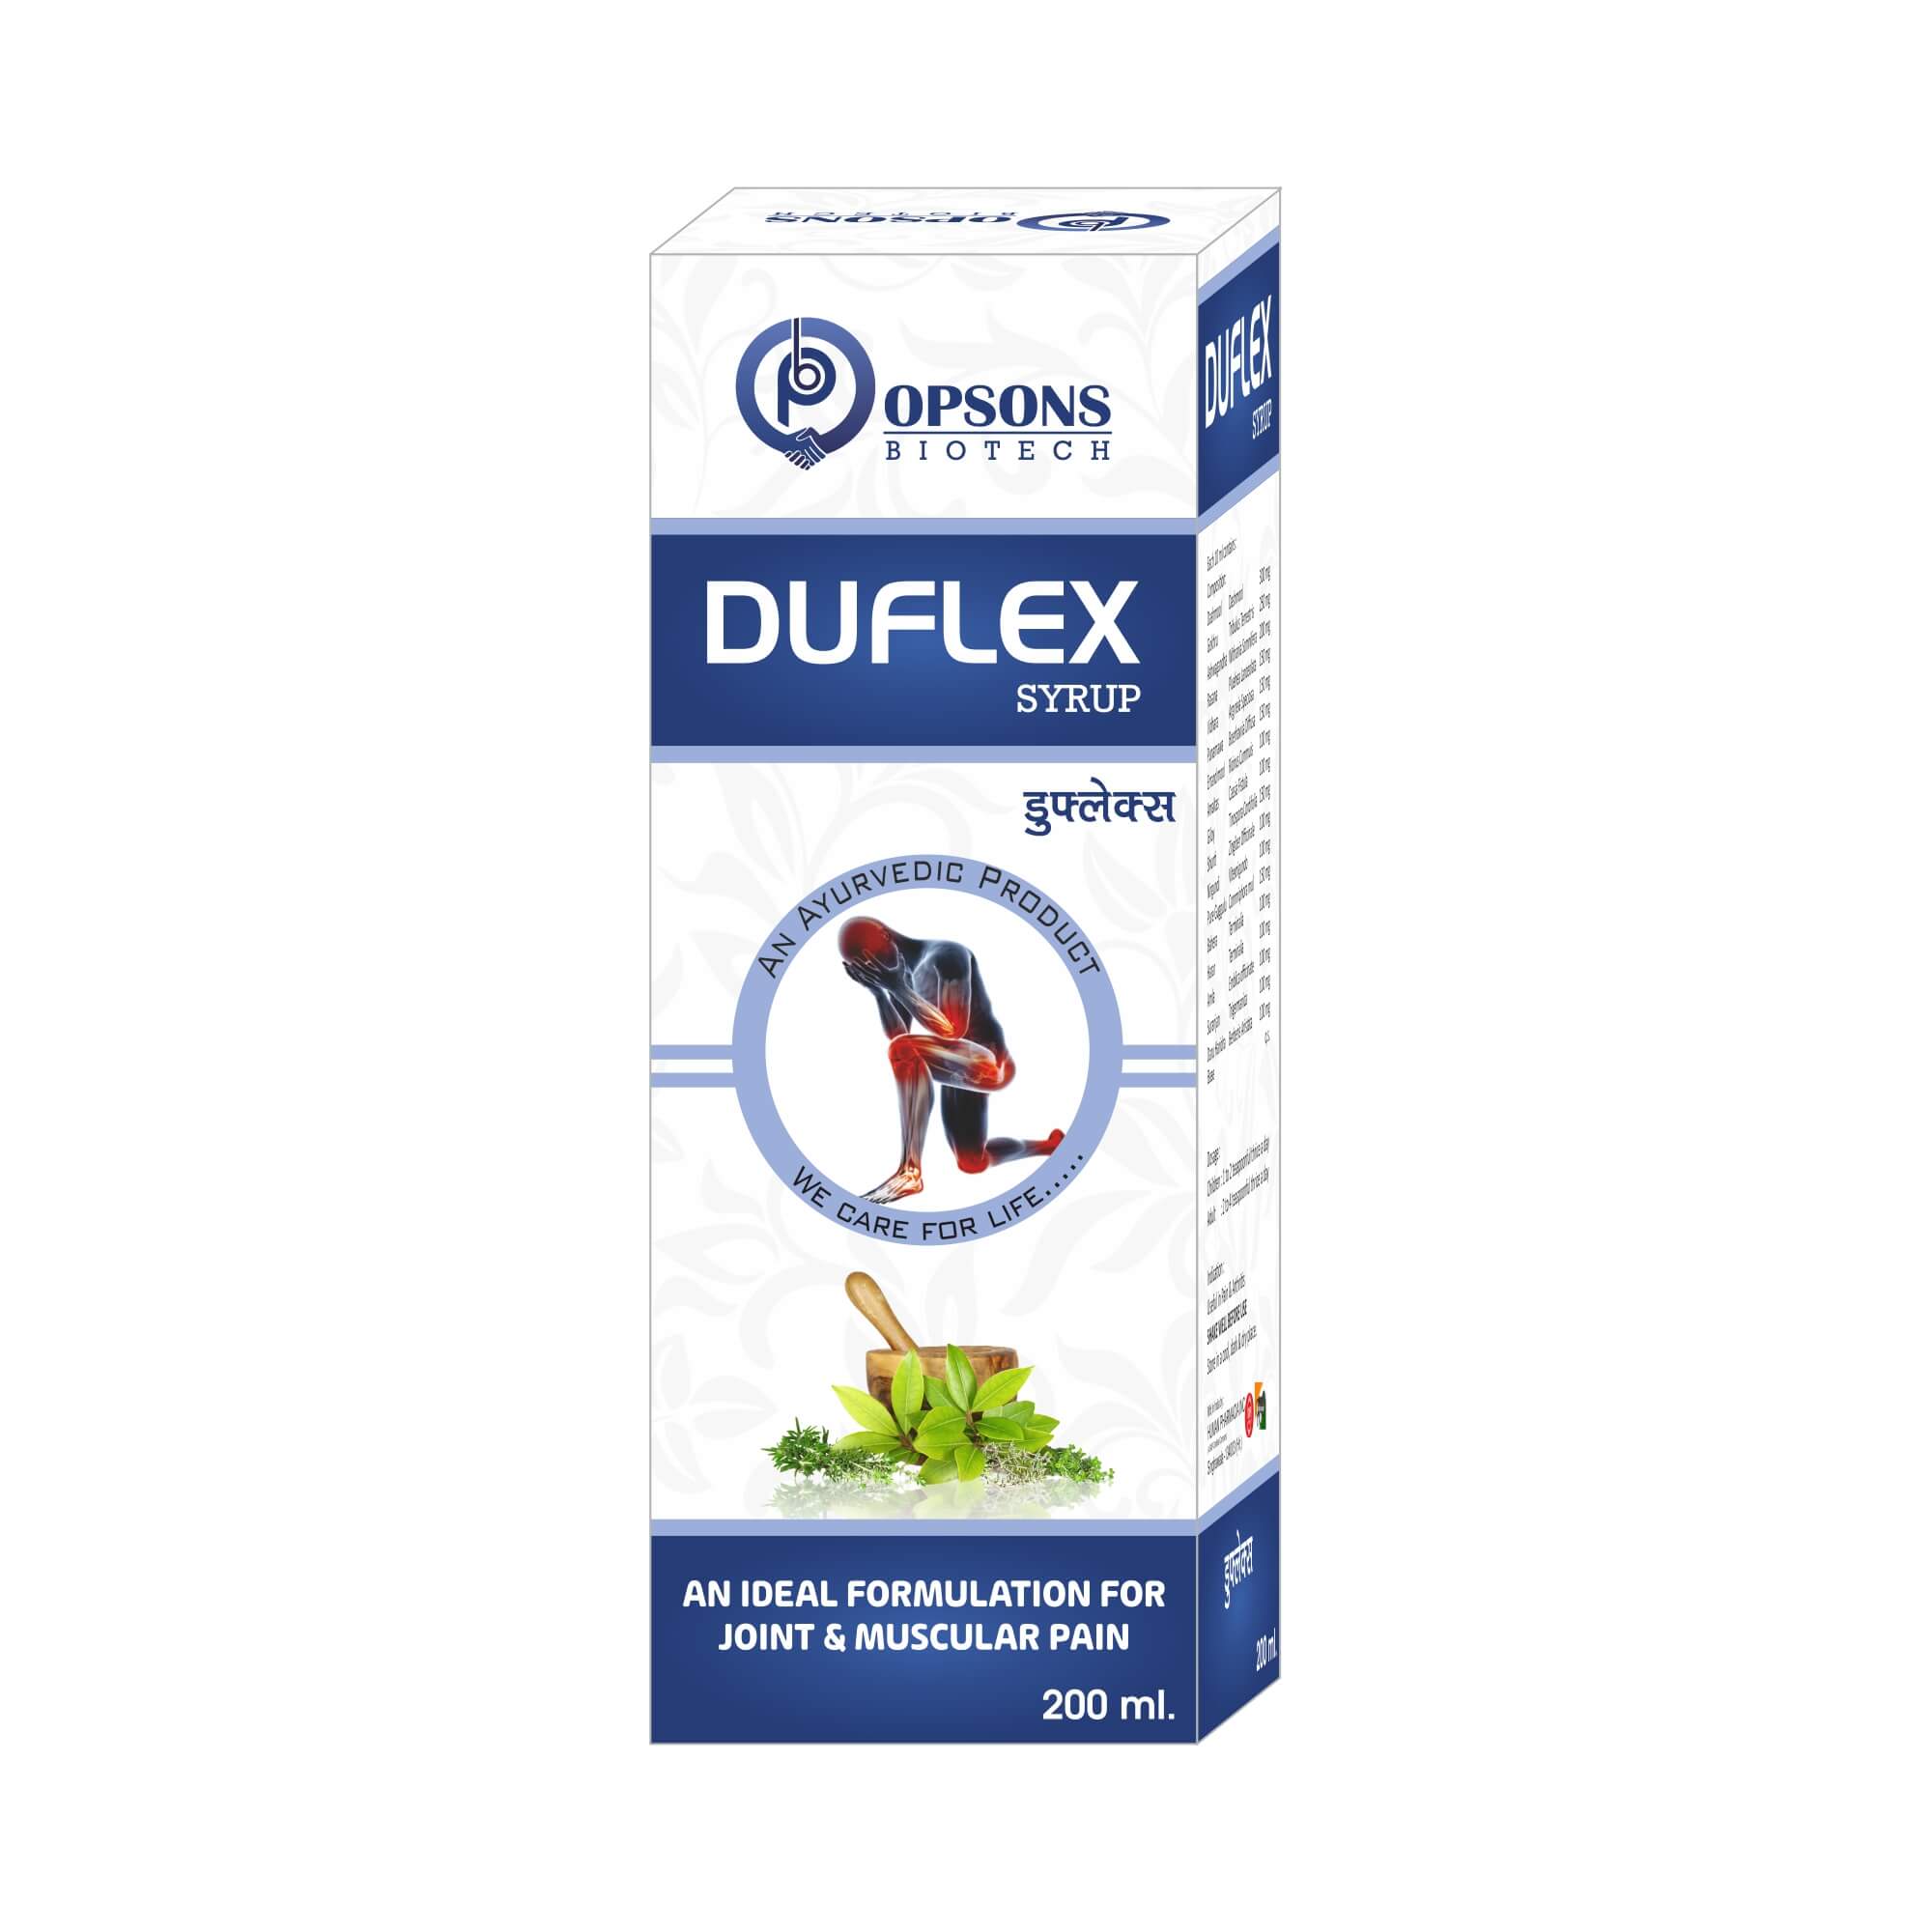 Product Name: Duflex, Compositions of Duflex are An ideal Formulation For Joint & Muscular Pain - Opsons Biotech